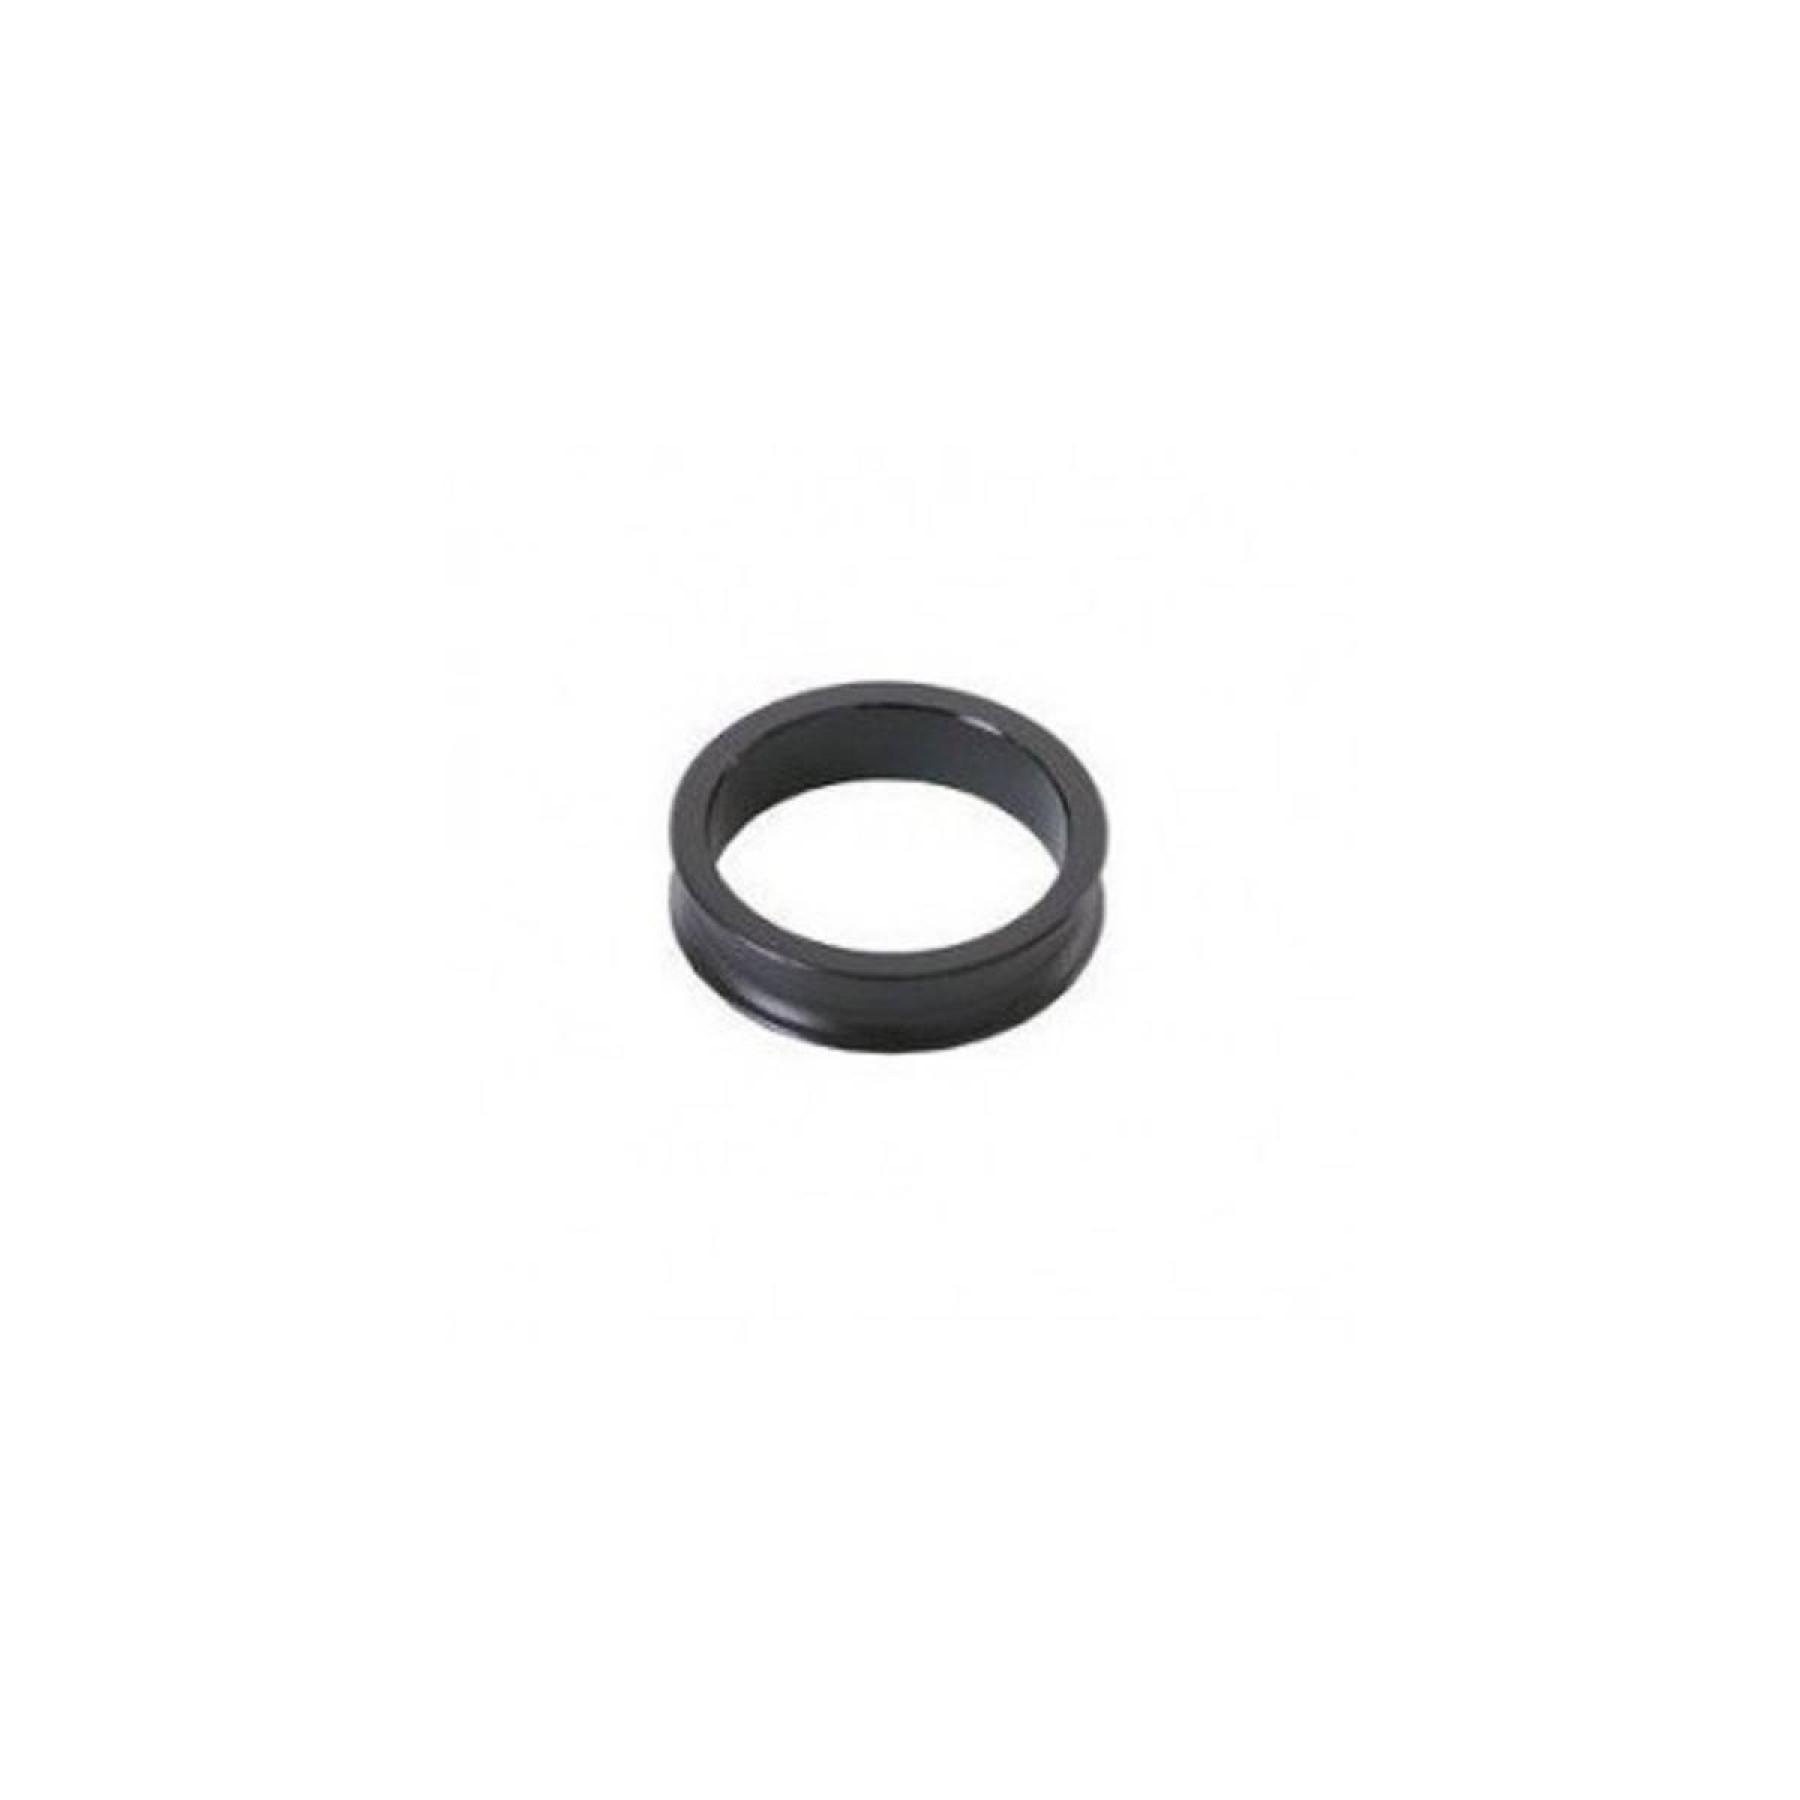 Movimento centrale Sram Bb 30Mm Spindle Spacer Ds 9.11